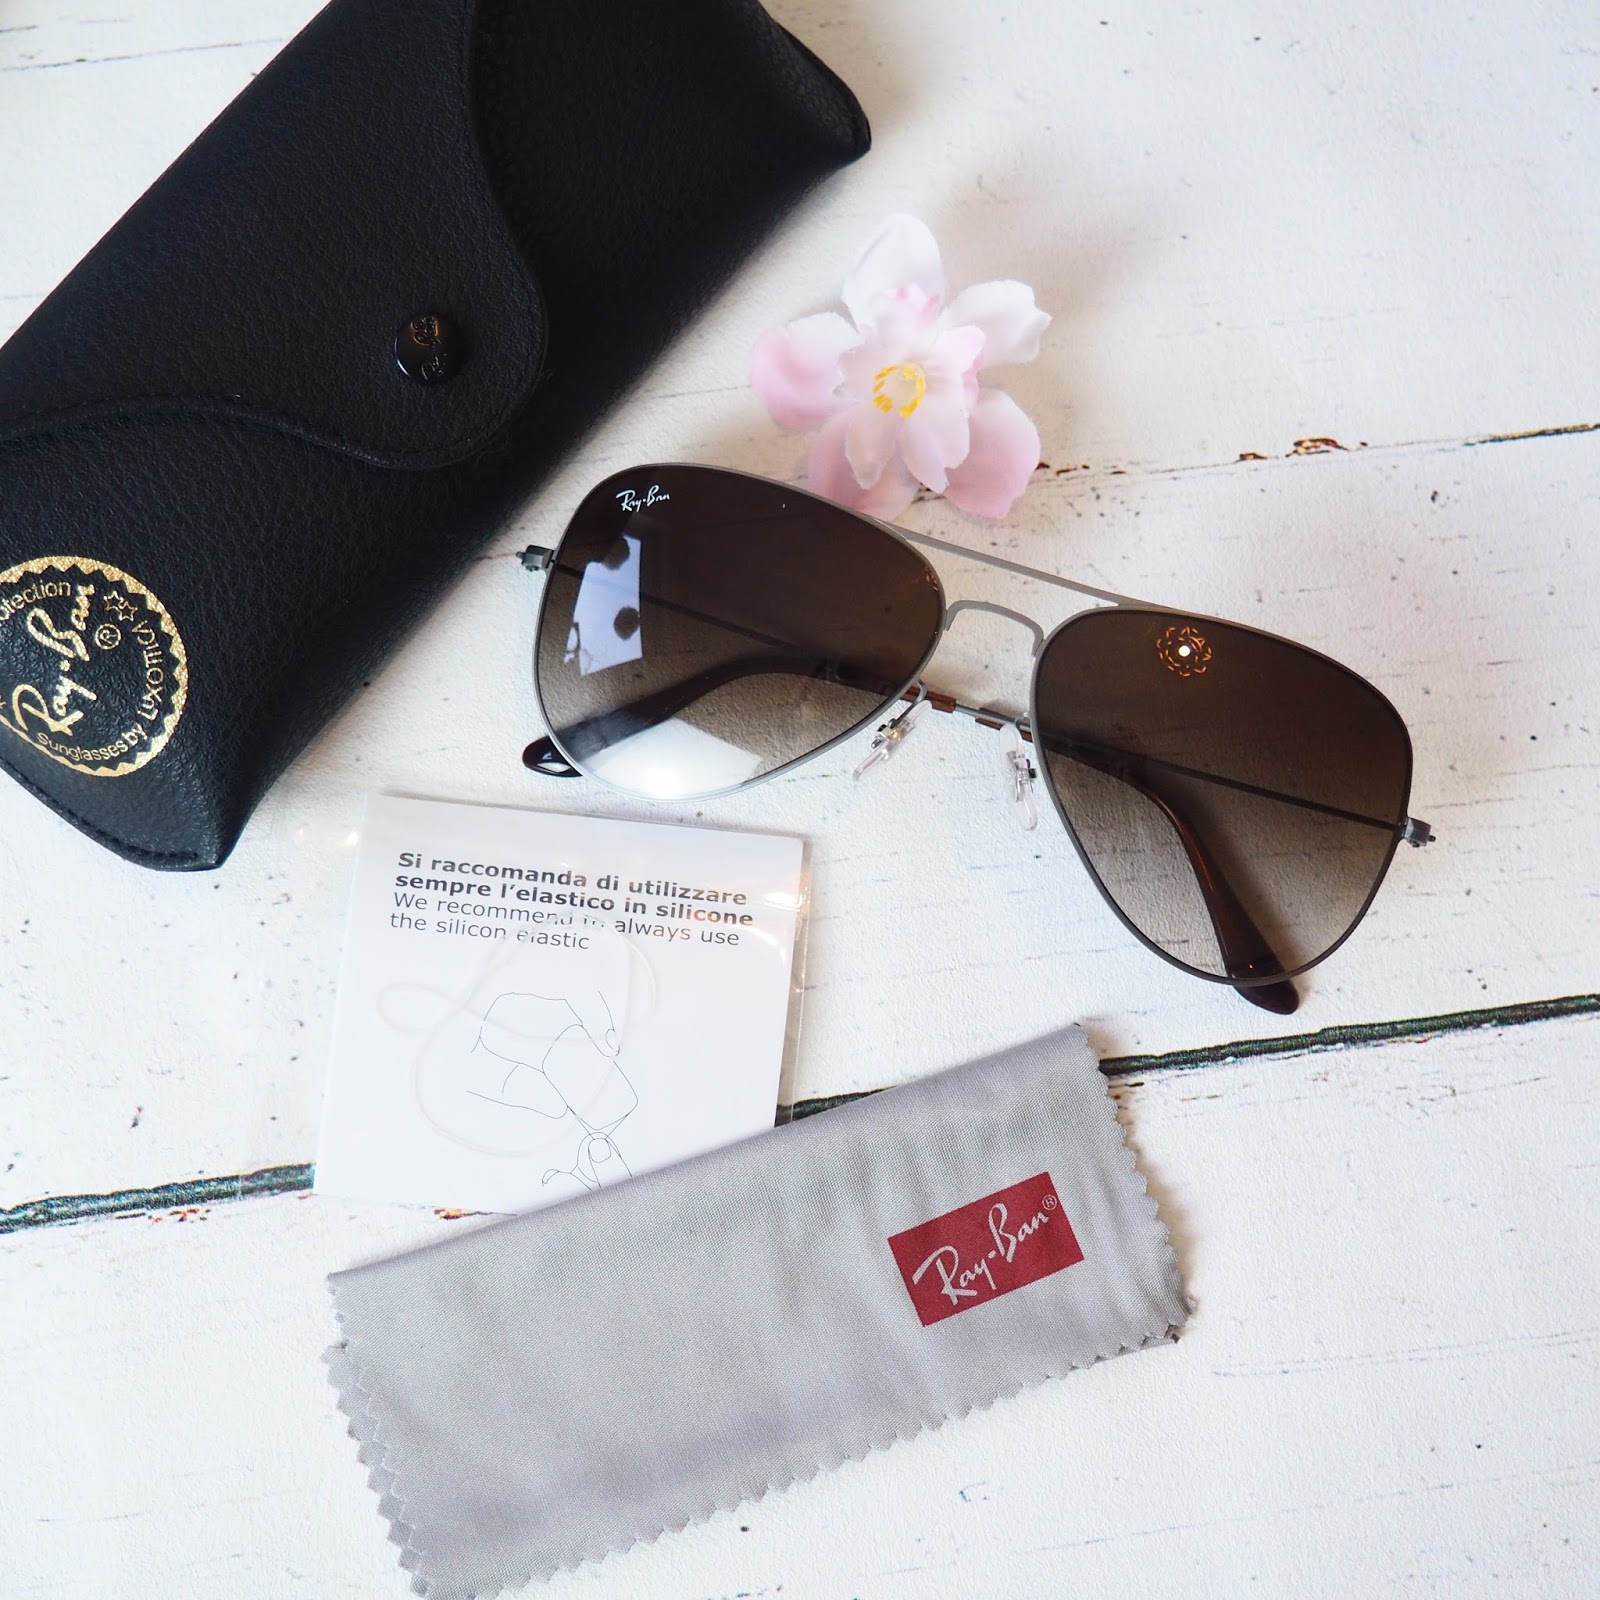 Ray-Ban 3513 Aviator Gunmetal Sunglasses review & Giveaway! - Don't Cramp  My Style